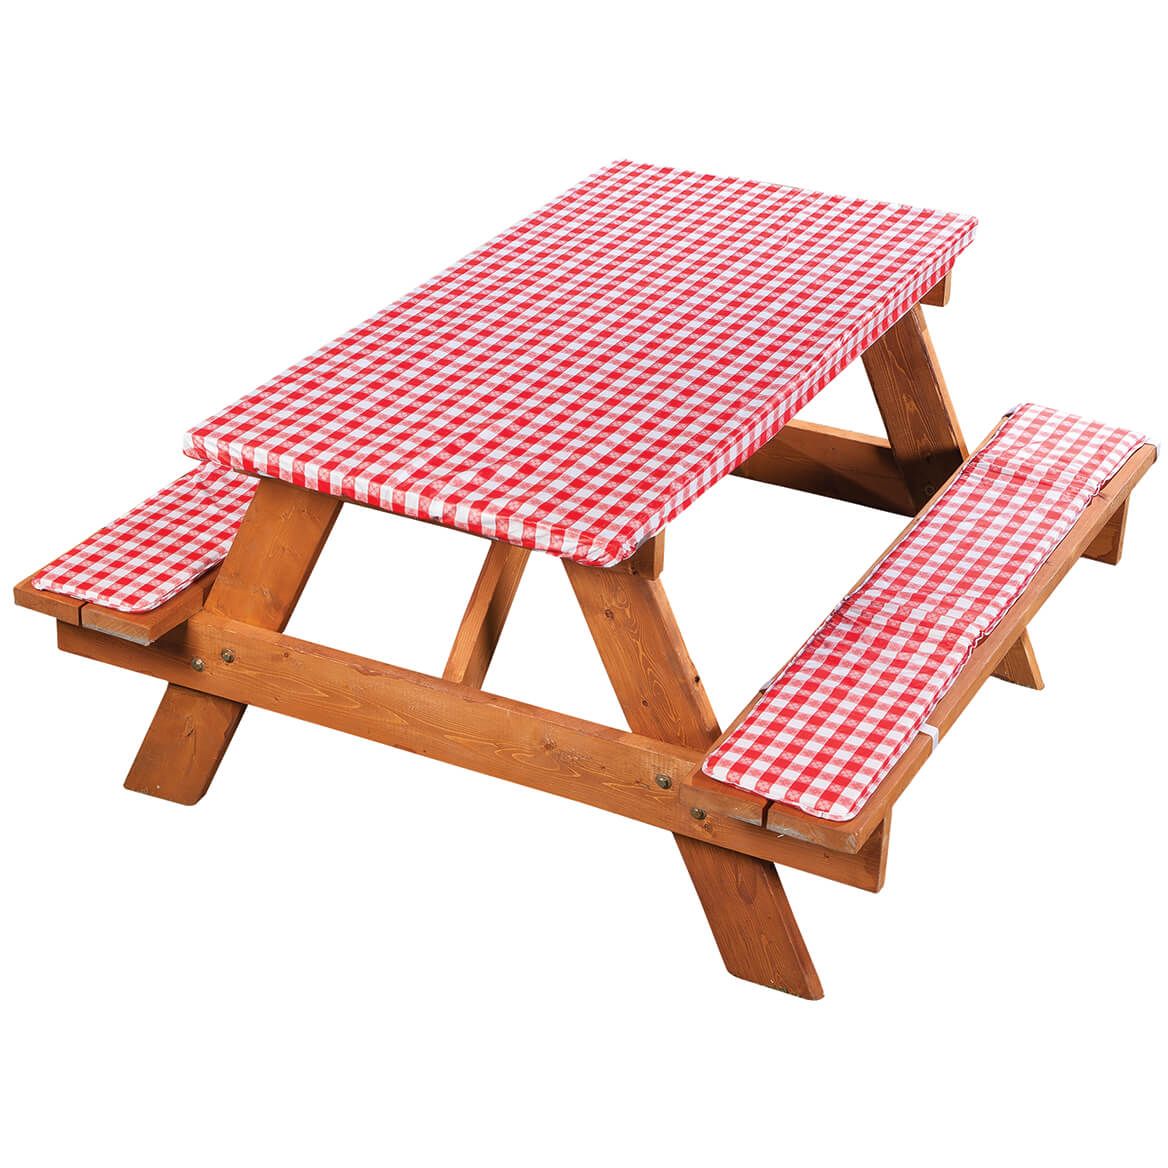 Deluxe Picnic Table Cover with Cushions + '-' + 363250